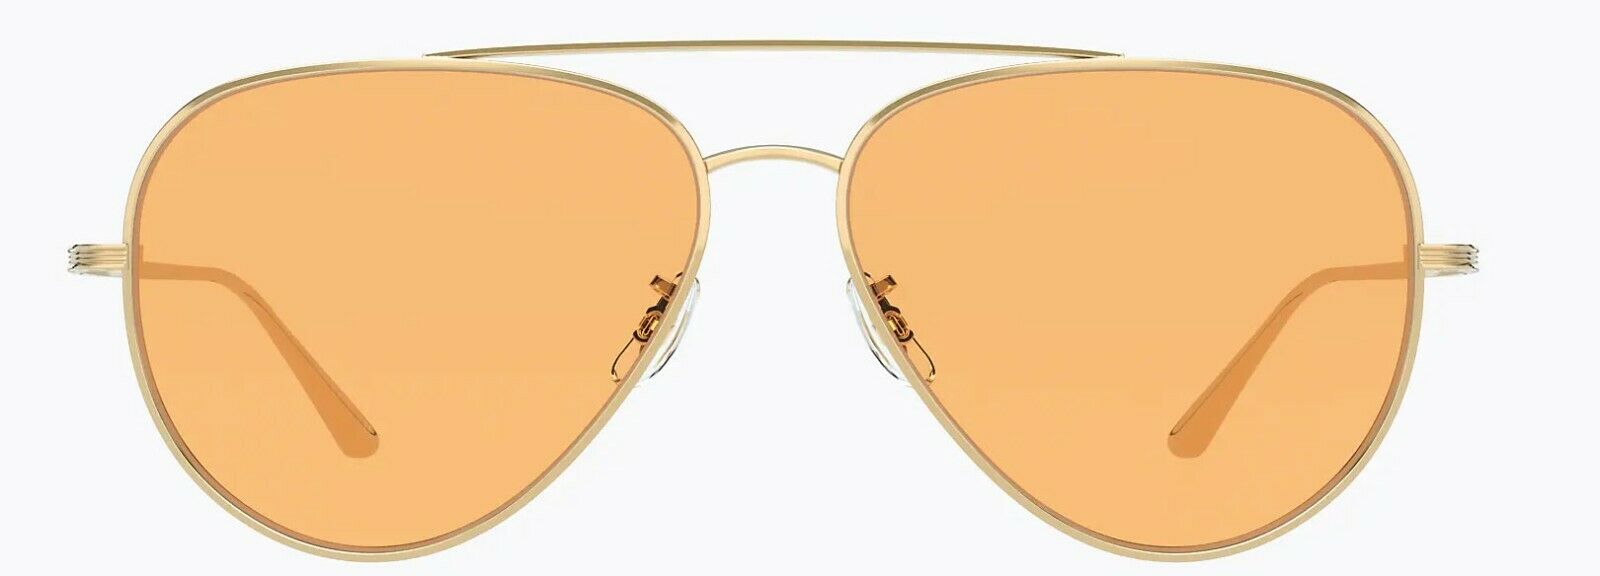 Oliver Peoples Sunglasses 1277ST 5292V9 The Row Casse Gold /Tangerine Photo 58mm-827934450943-classypw.com-2